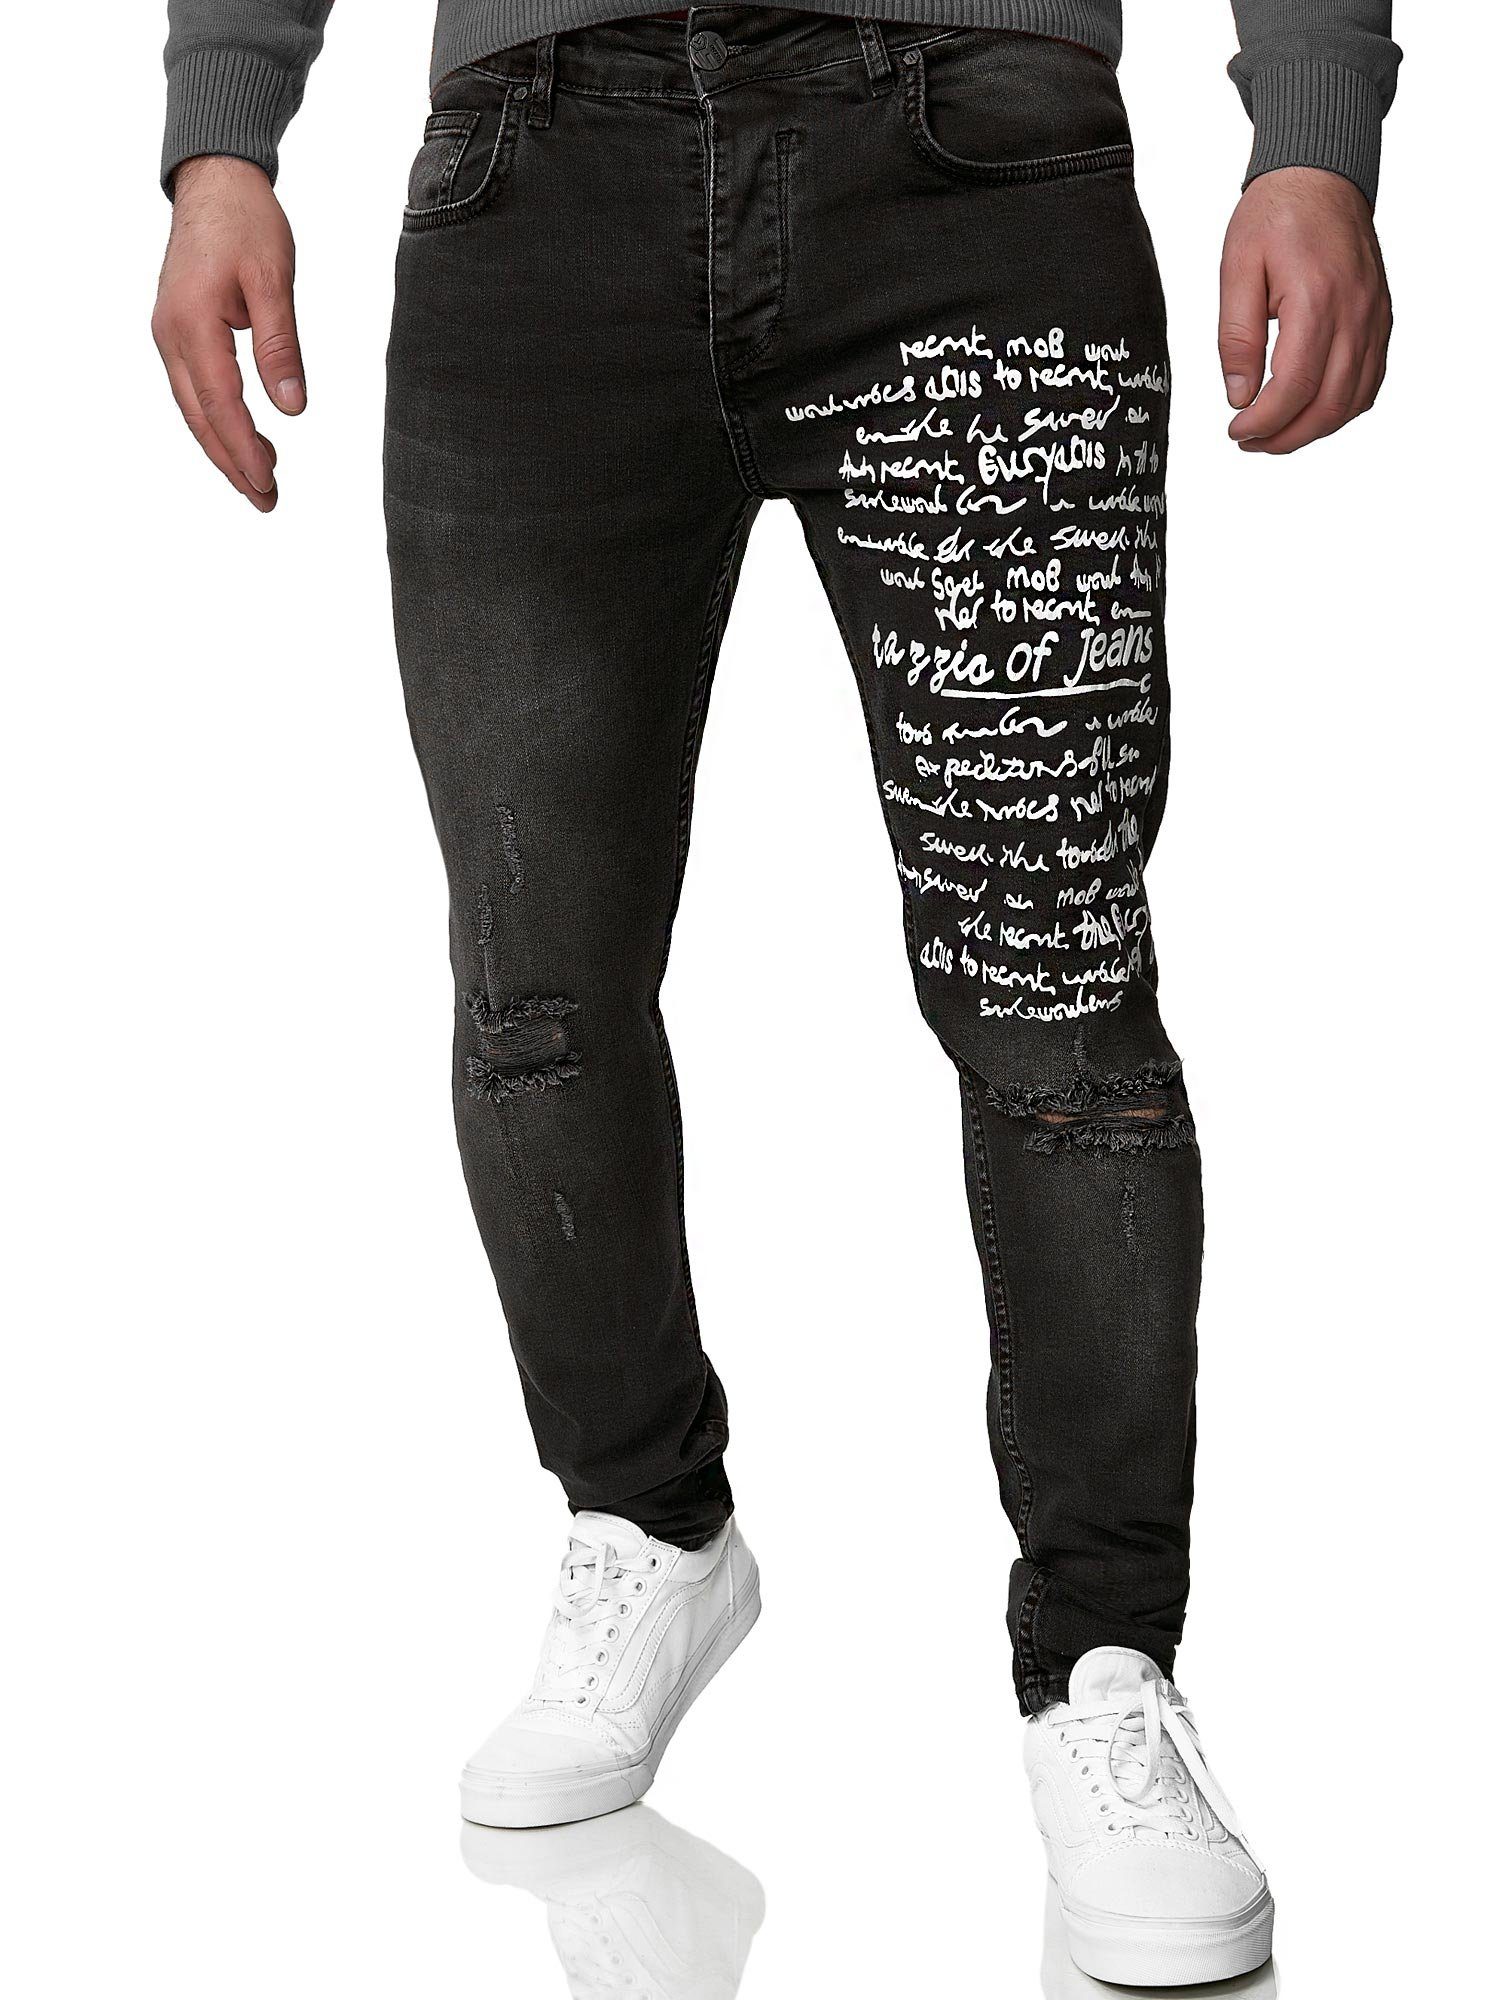 Tazzio Skinny-fit-Jeans A102 im Destroyed-Look schwarz | Stretchjeans